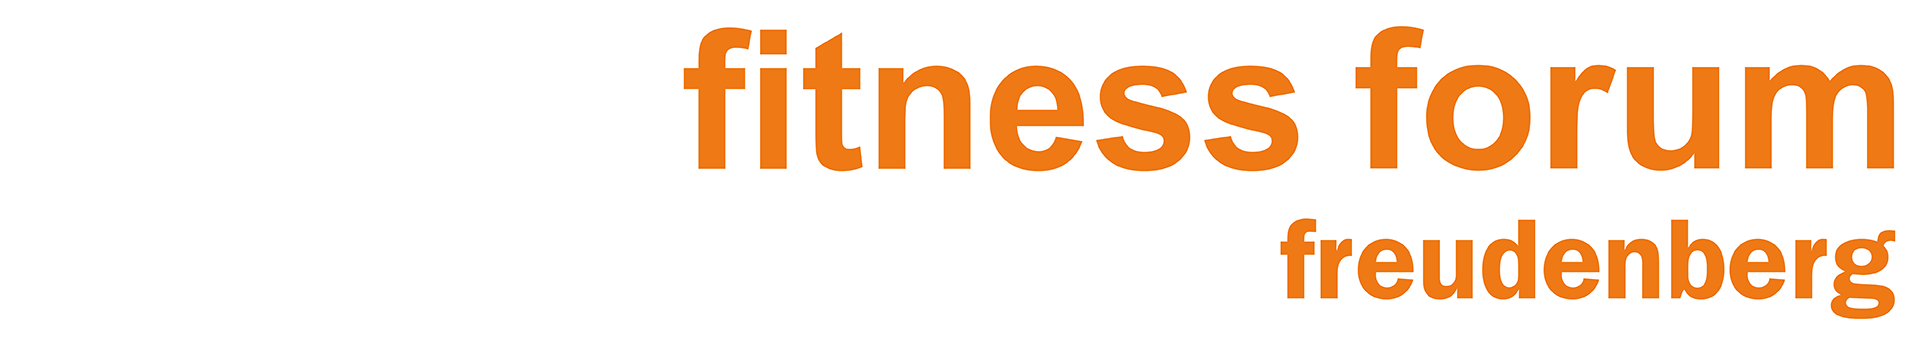 Fitness Forum Title Image